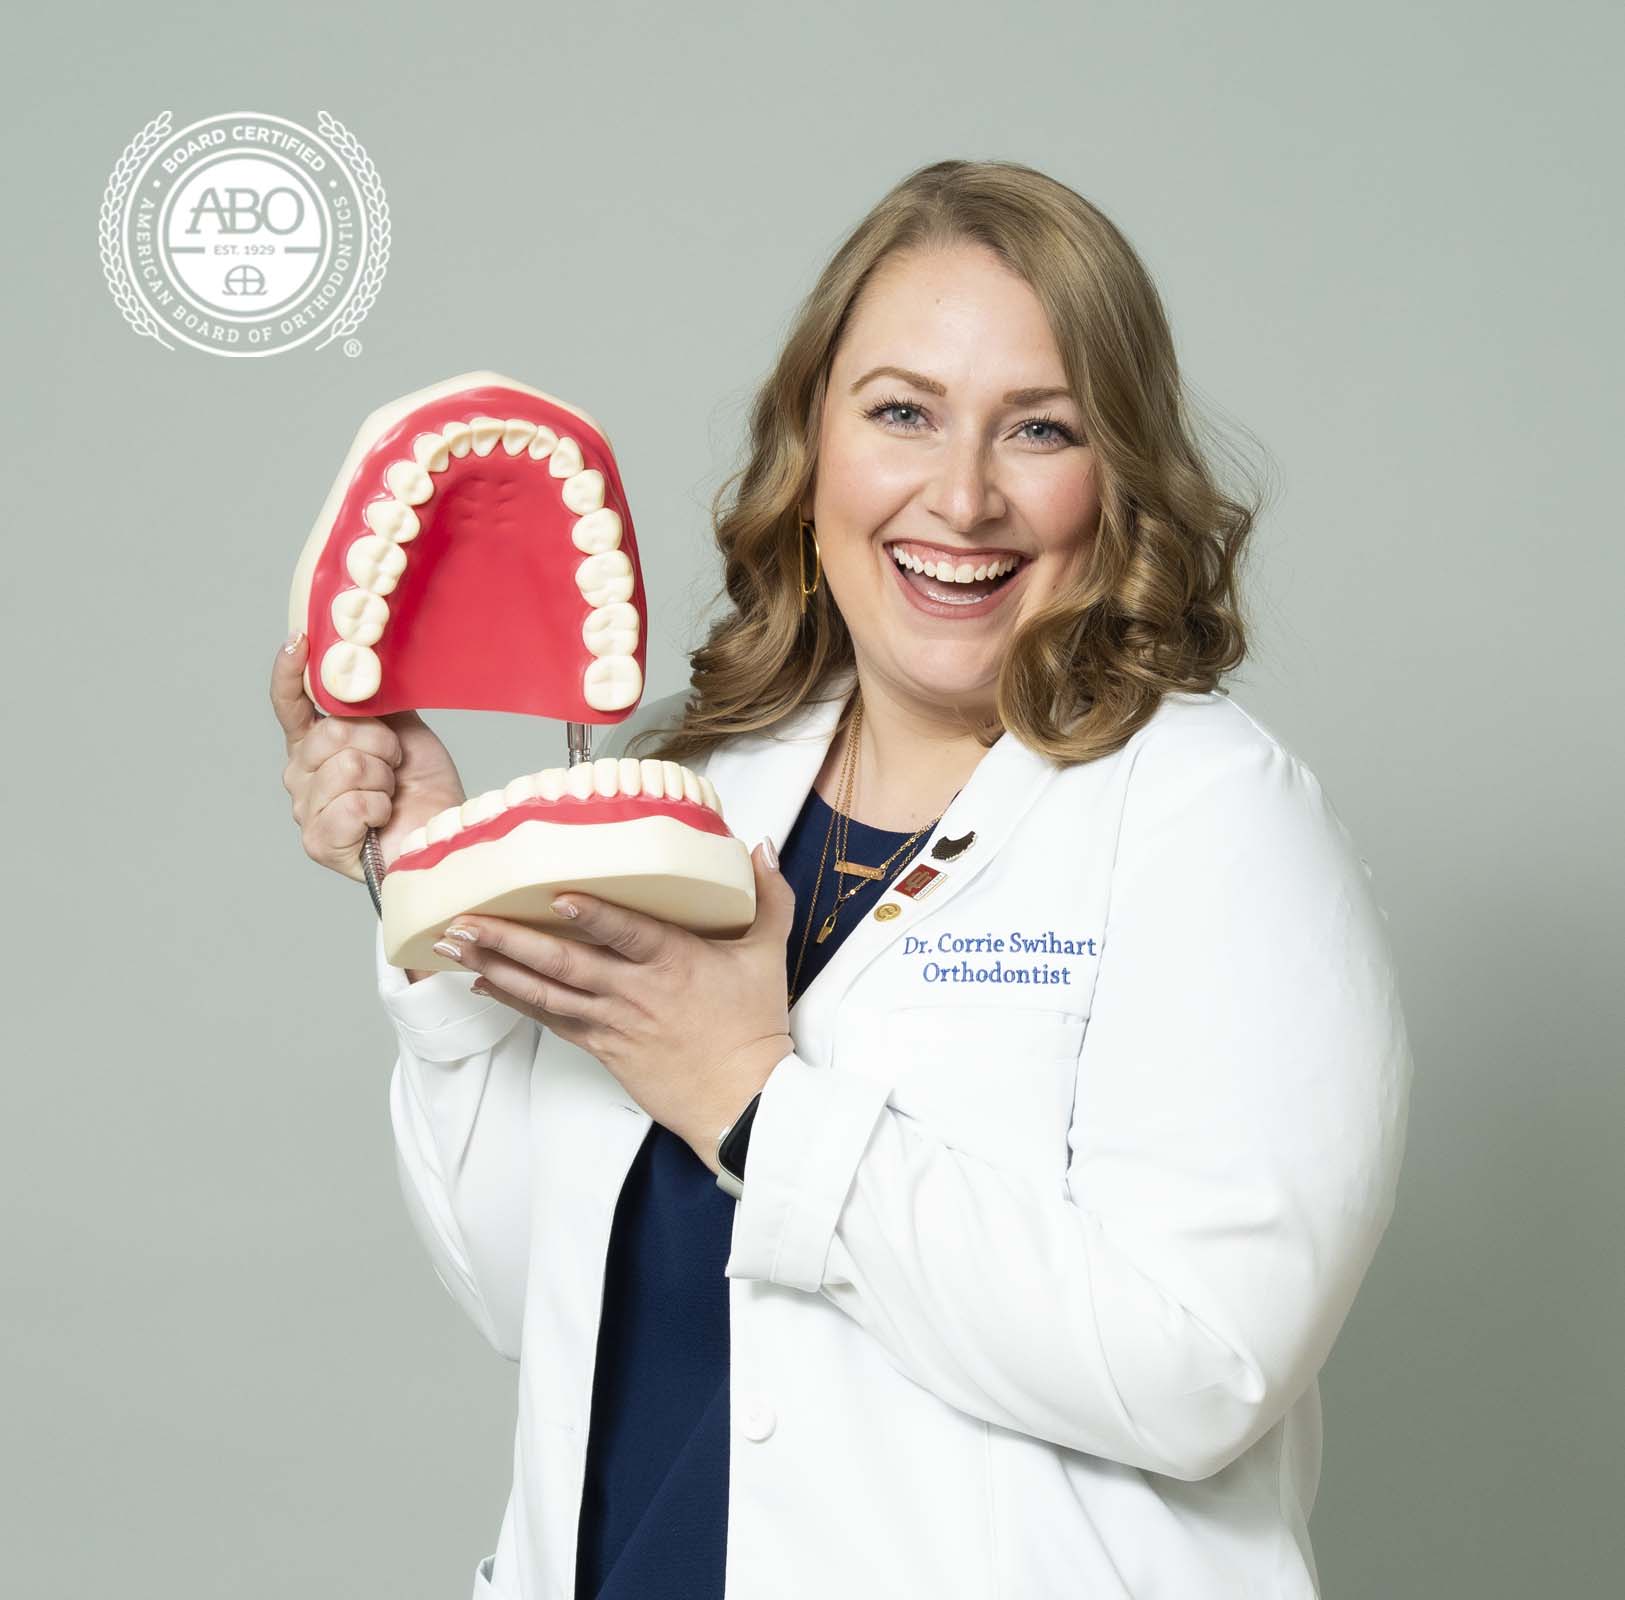 Dr. Corrie Swihart is ABO certified orthodontists